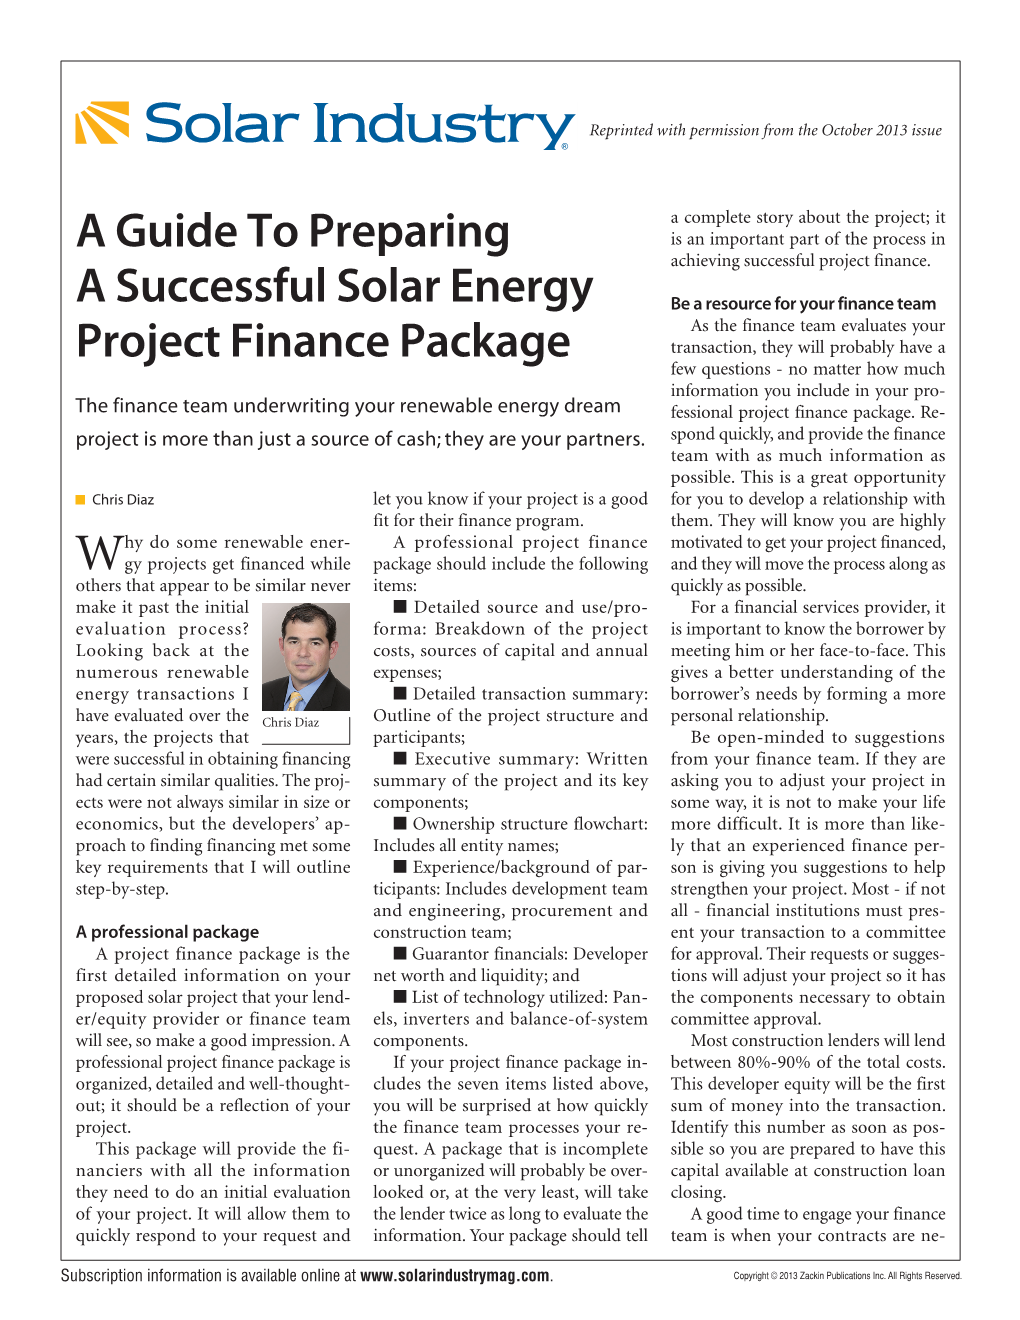 A Guide to Preparing a Successful Solar Energy Project Finance